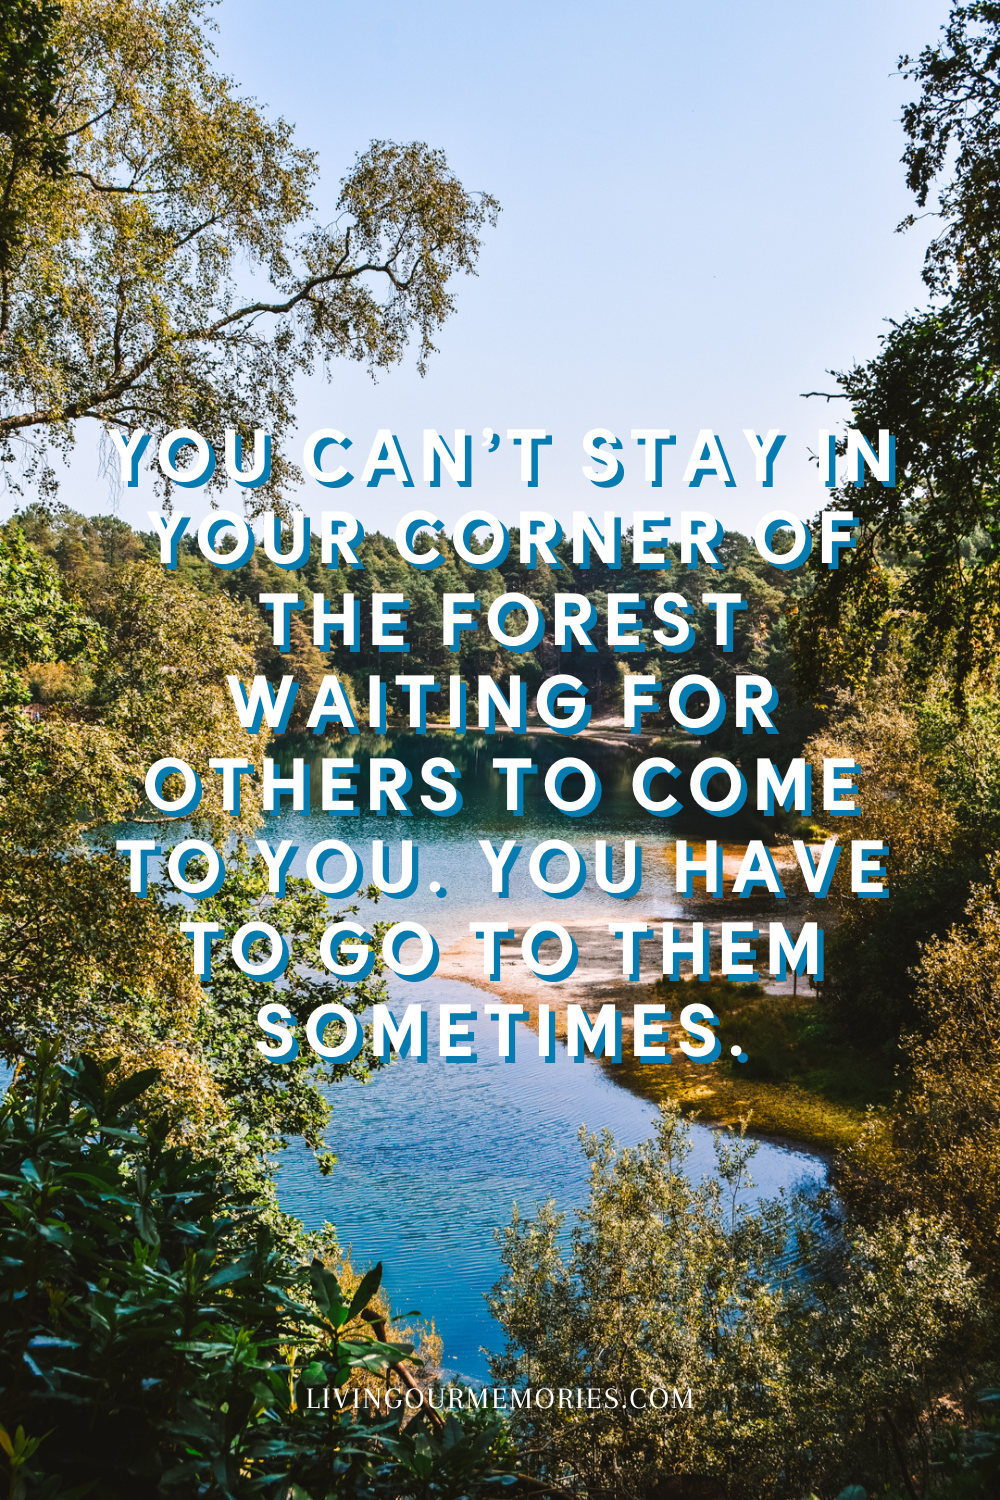 You can’t stay in your corner of the Forest waiting for others to come to you. You have to go to them sometimes.